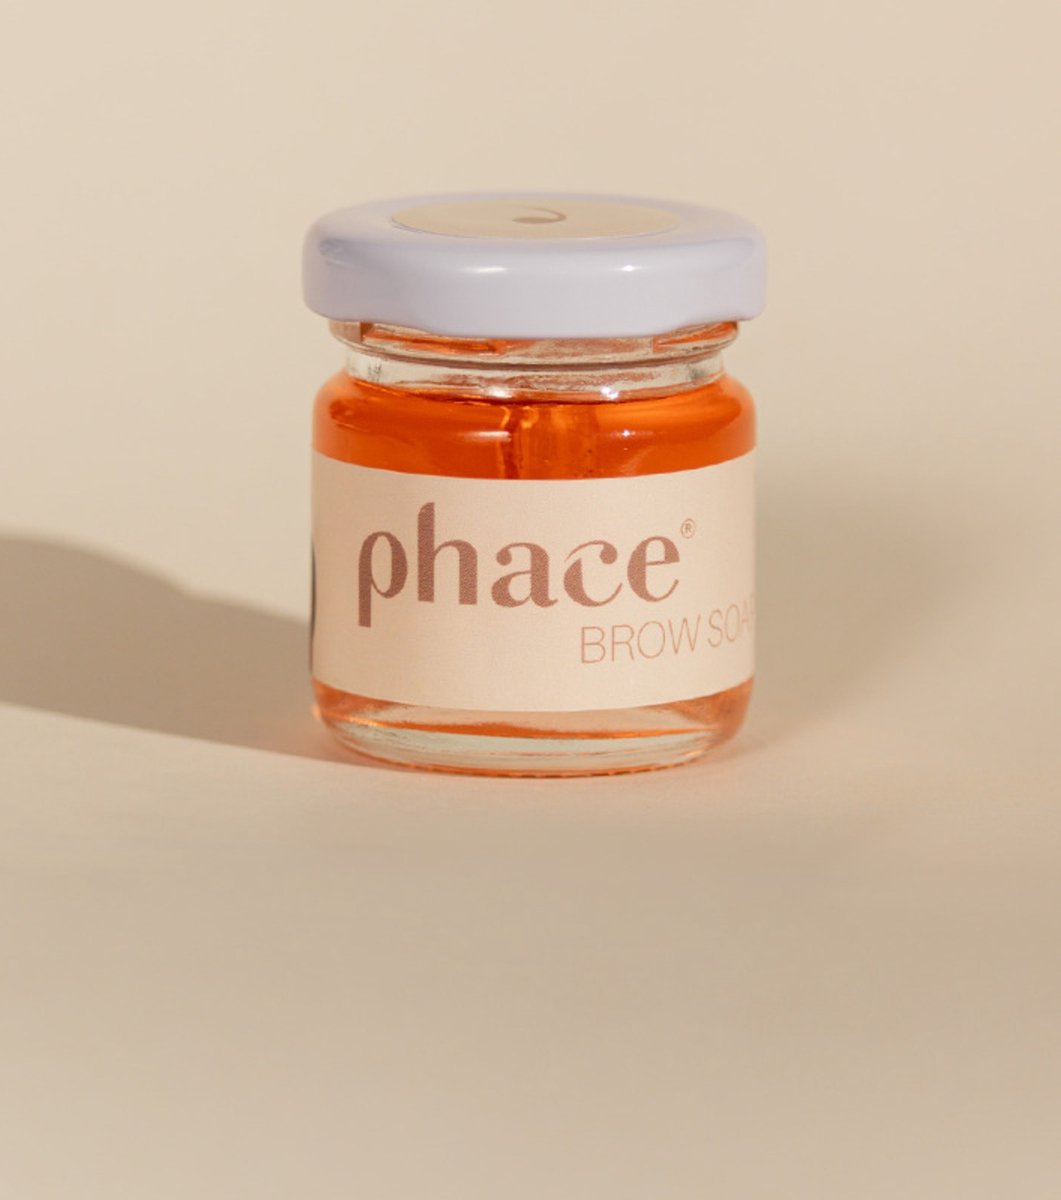 Phace Brow Soap